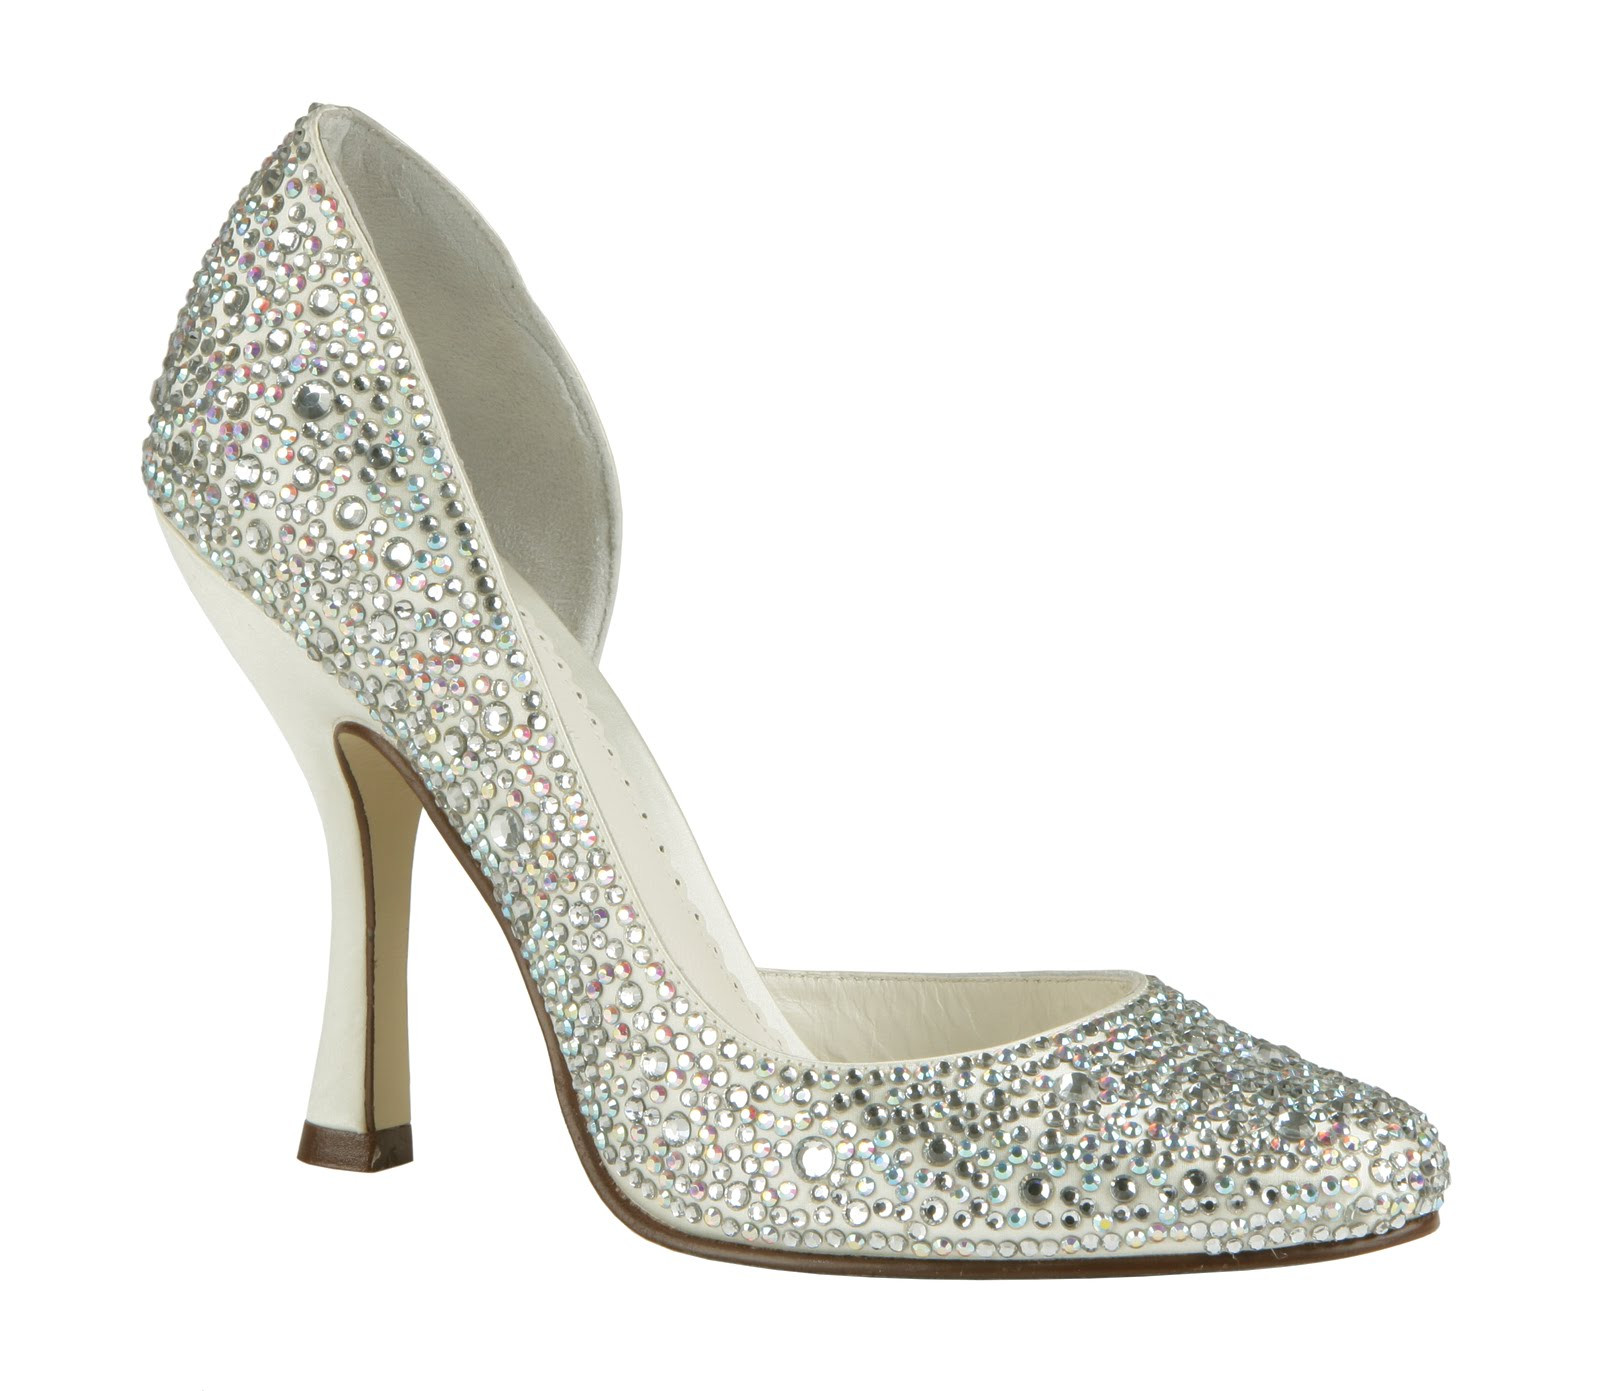 Sparkle Wedding Shoes
 Everything But The Dress Sparkly Bridal Accessories All